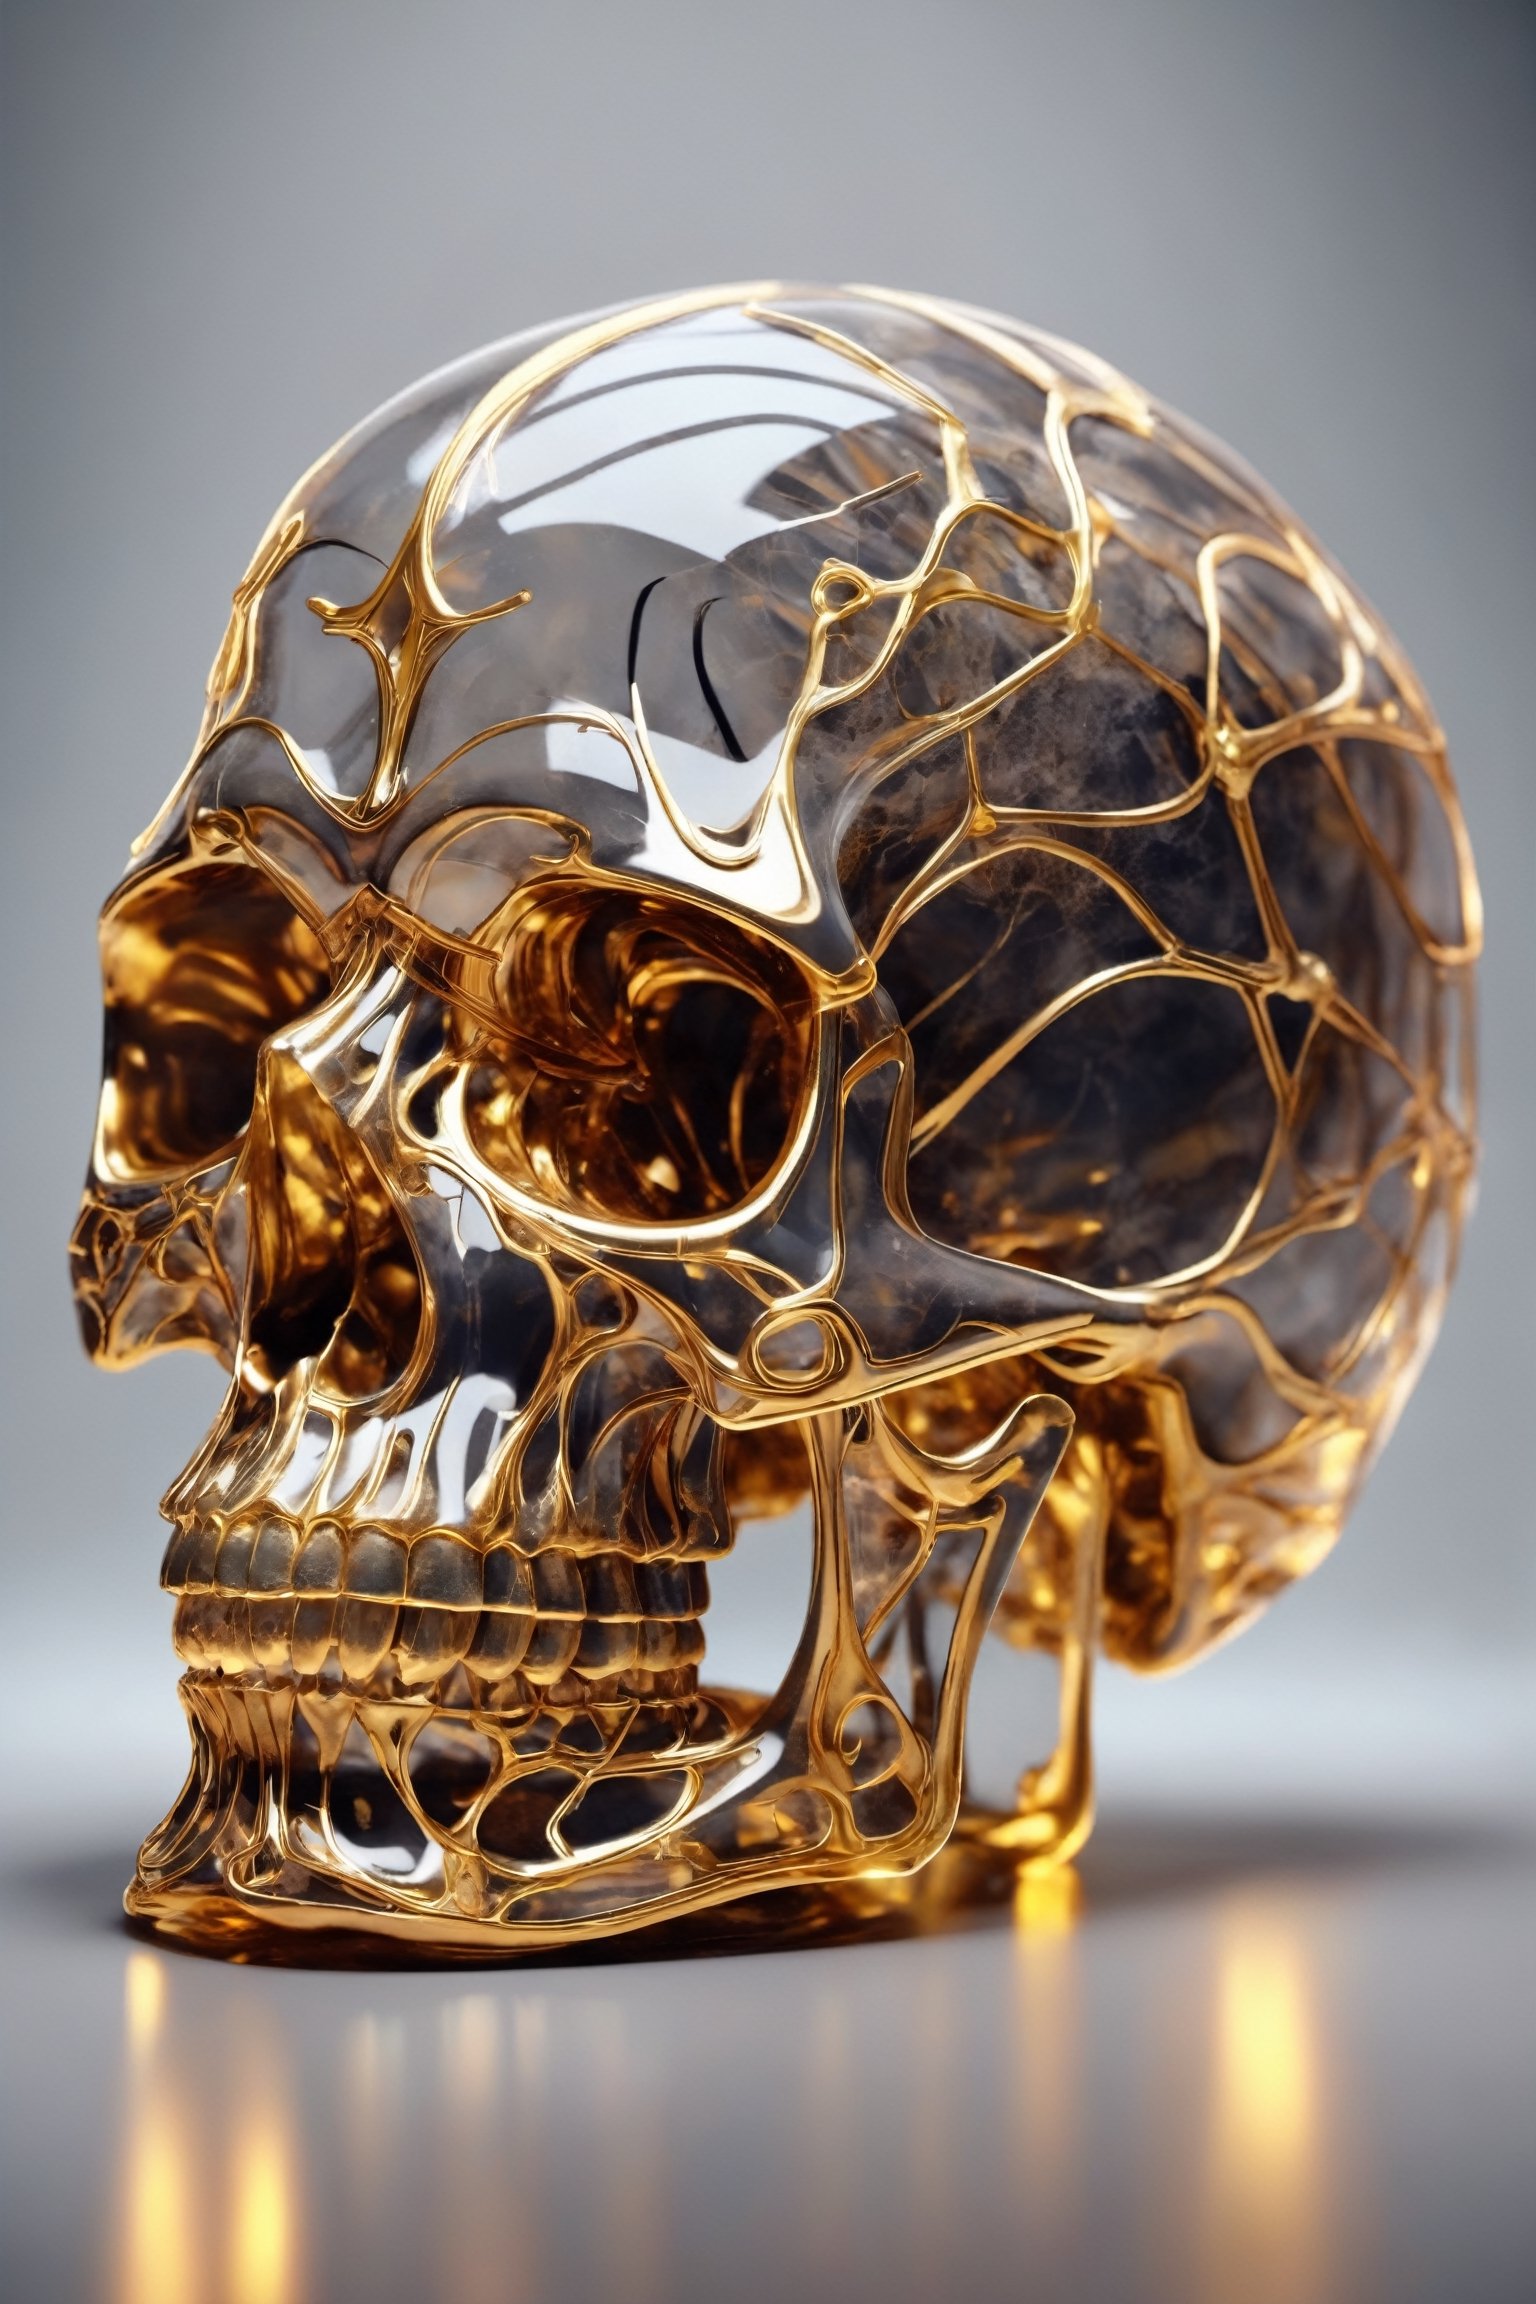 Skull made of crystal, beautiful atmosphere with golden lines, completely transparent bones,skll